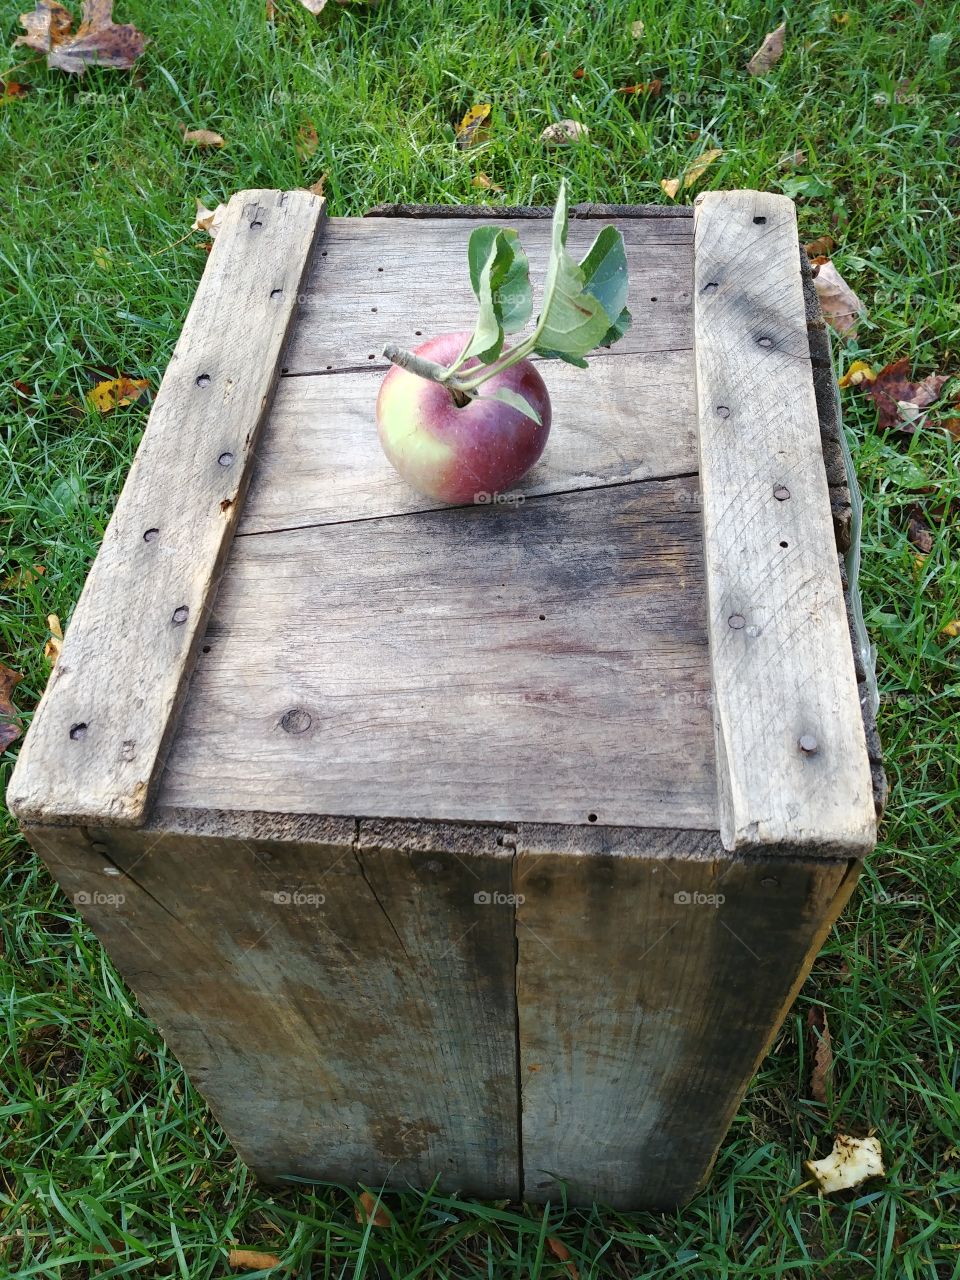 Single Apple on Wooden Crate